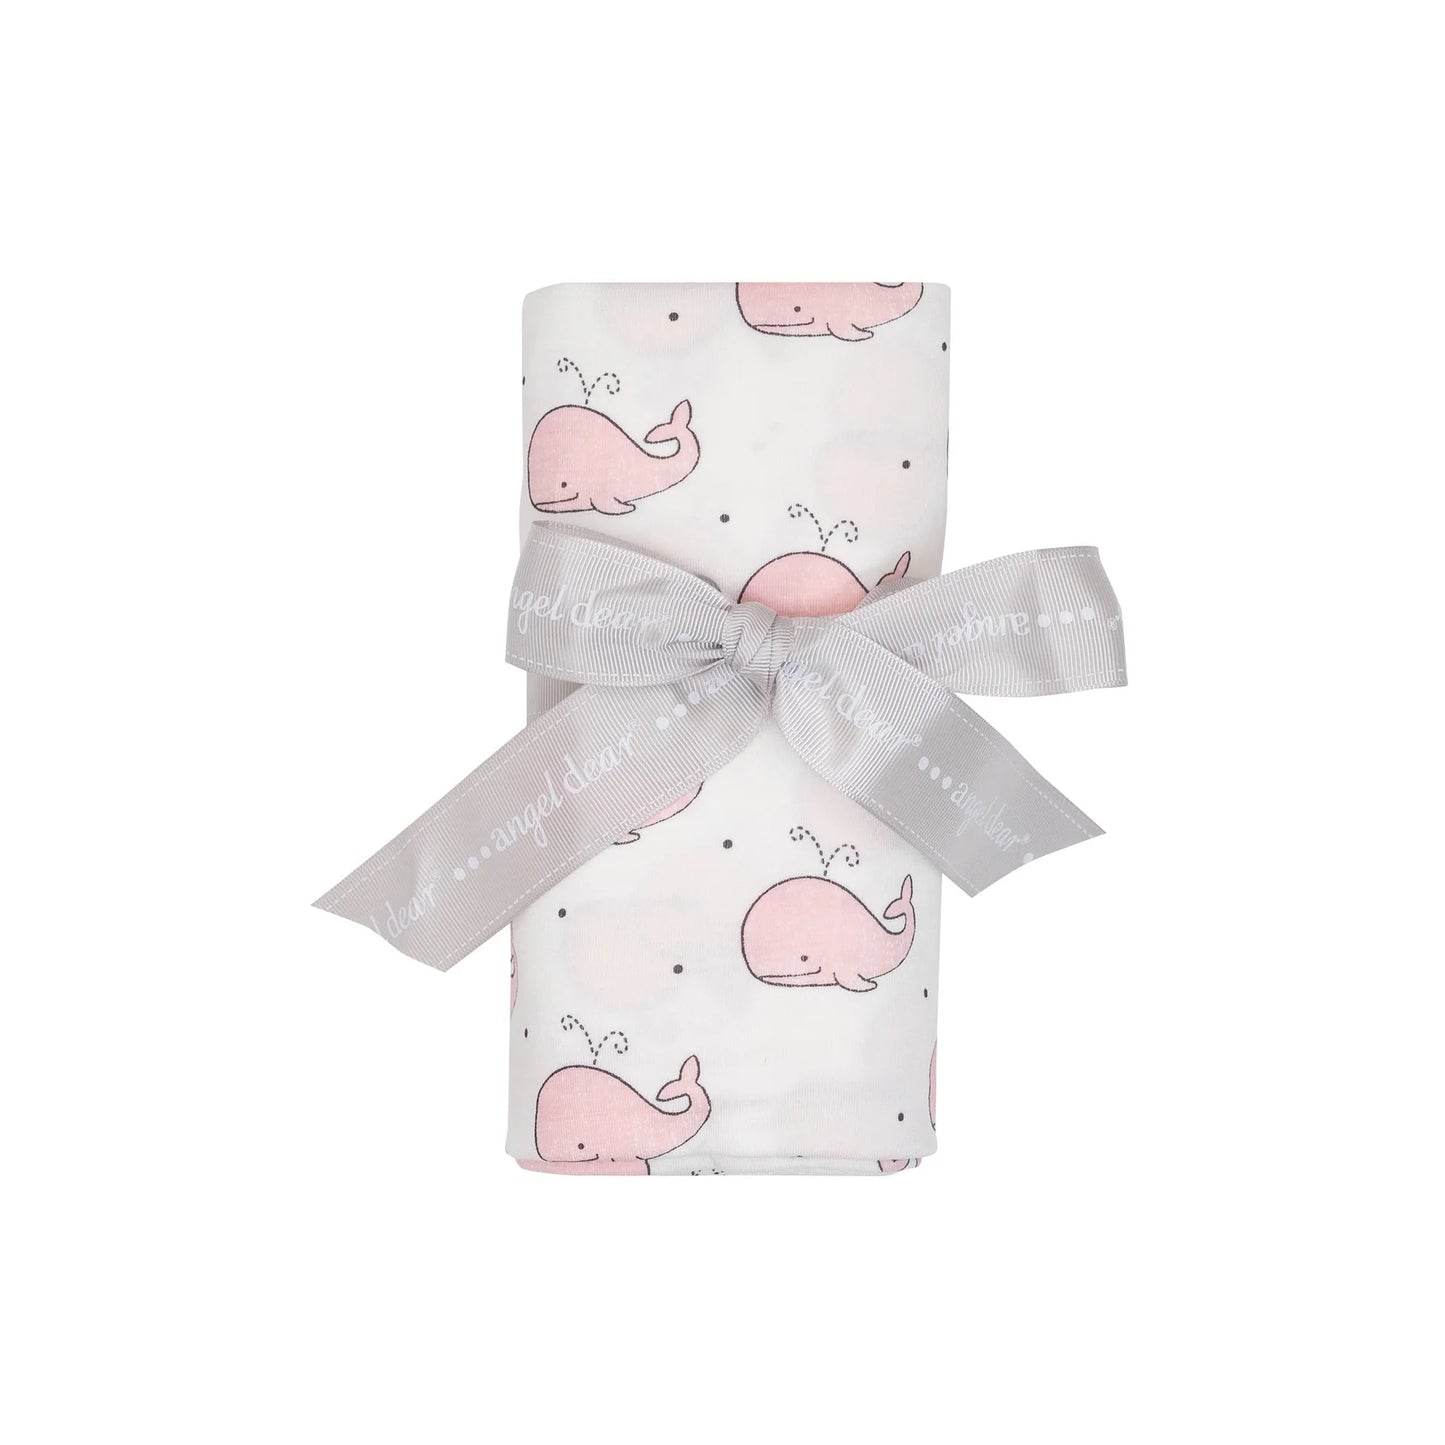 Bubbly Pink Whale Swaddle Blanket